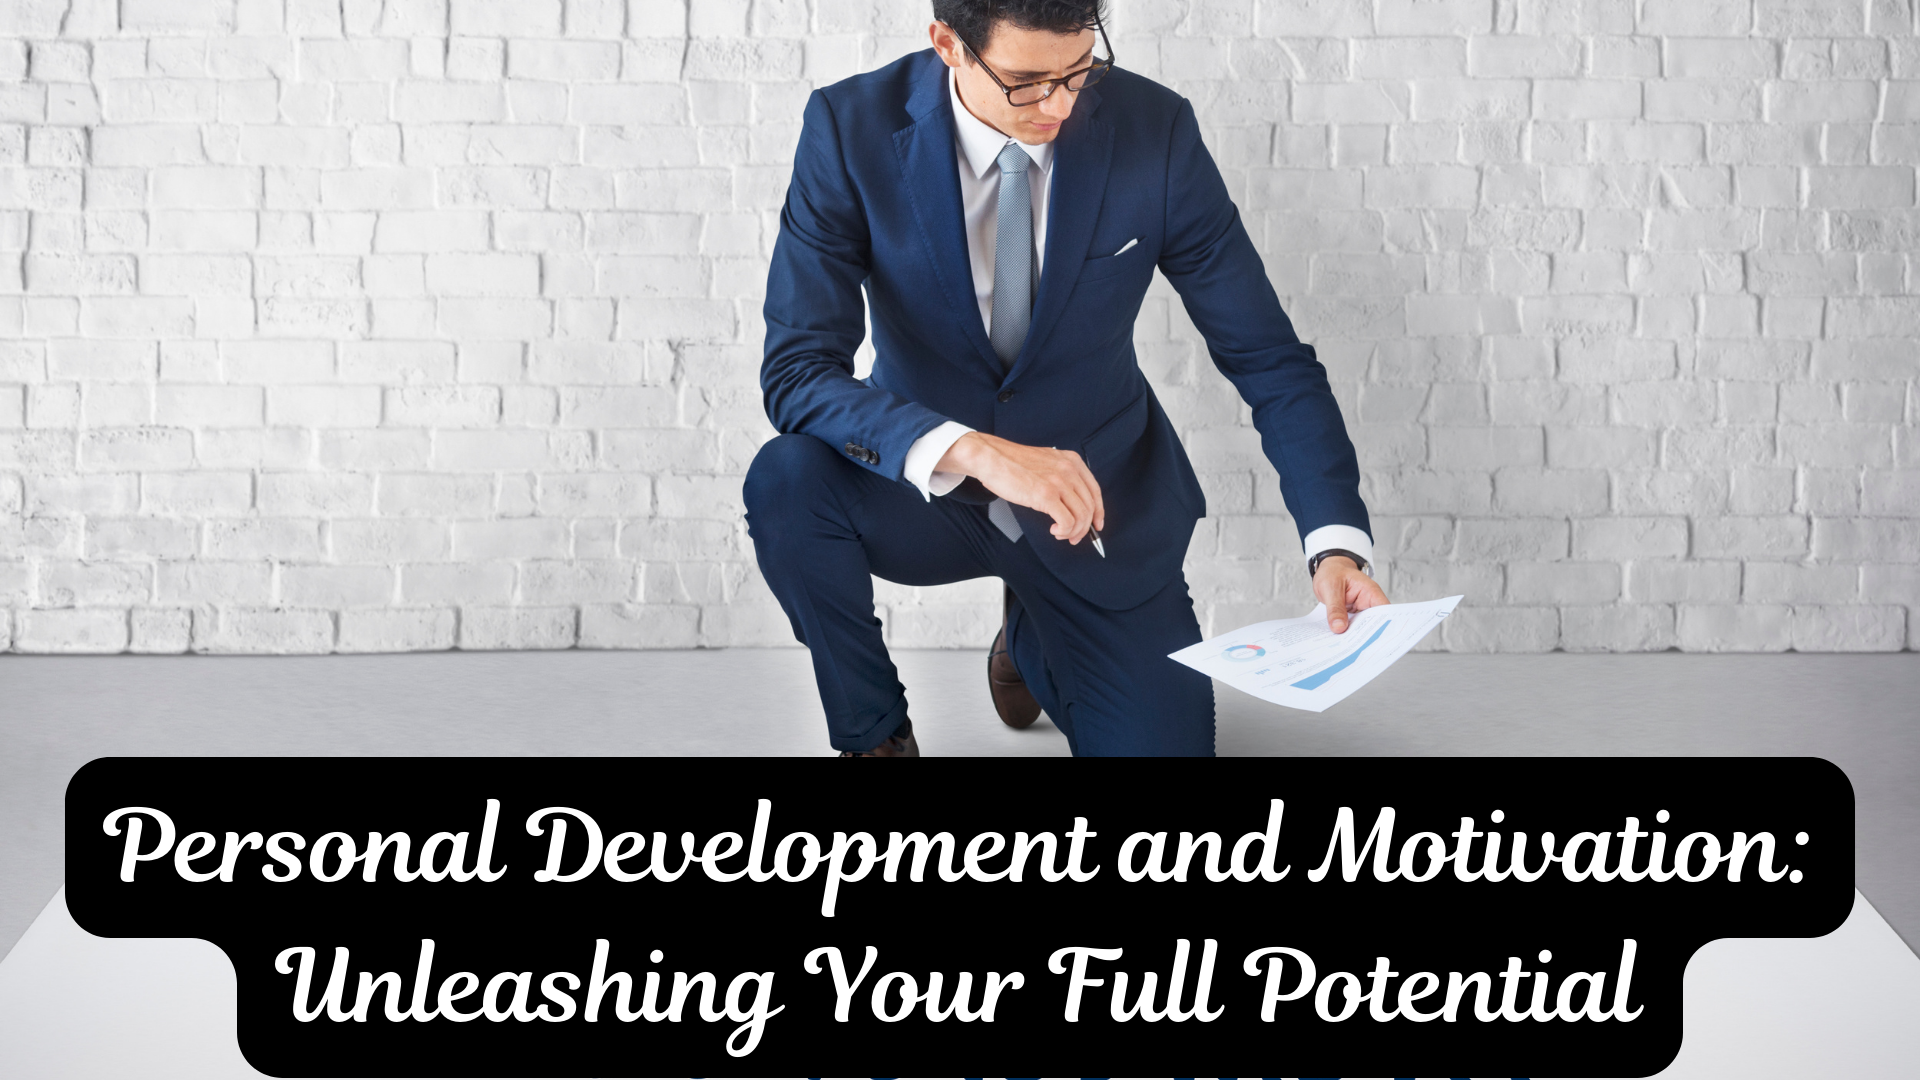 Personal Development and Motivation: Unleashing Your Full Potential